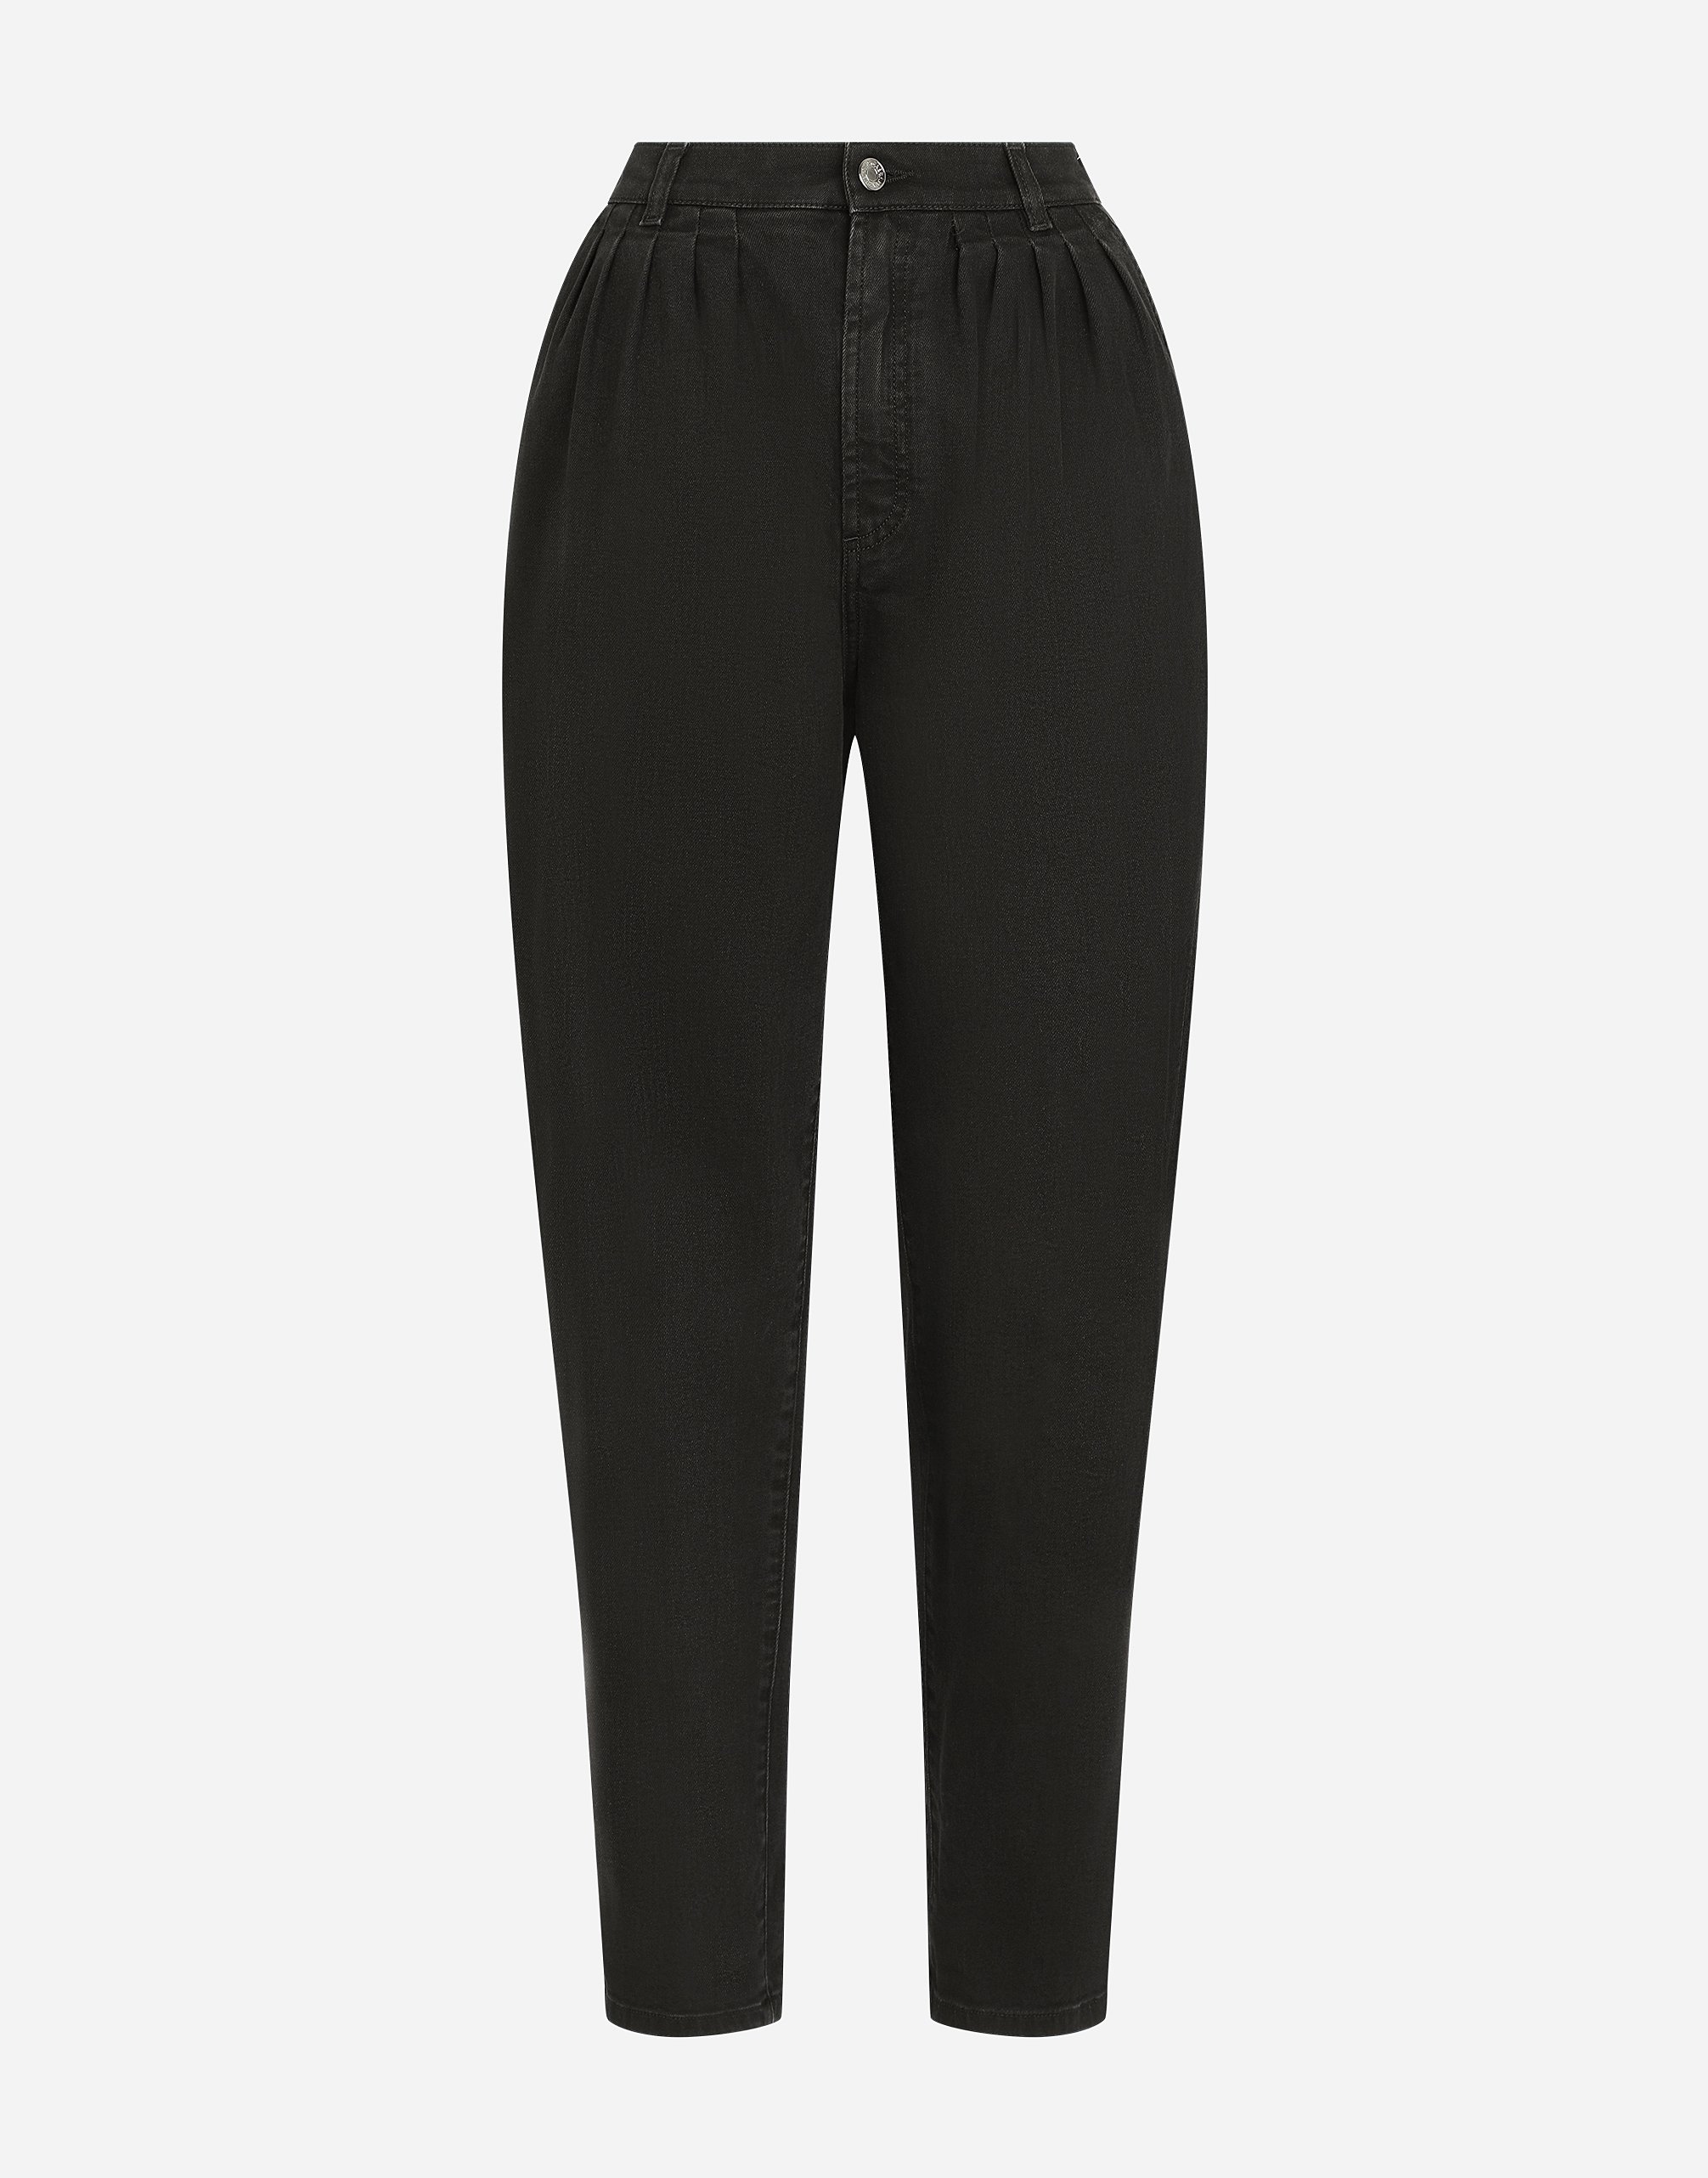 Carrot-leg jeans with darts in Black